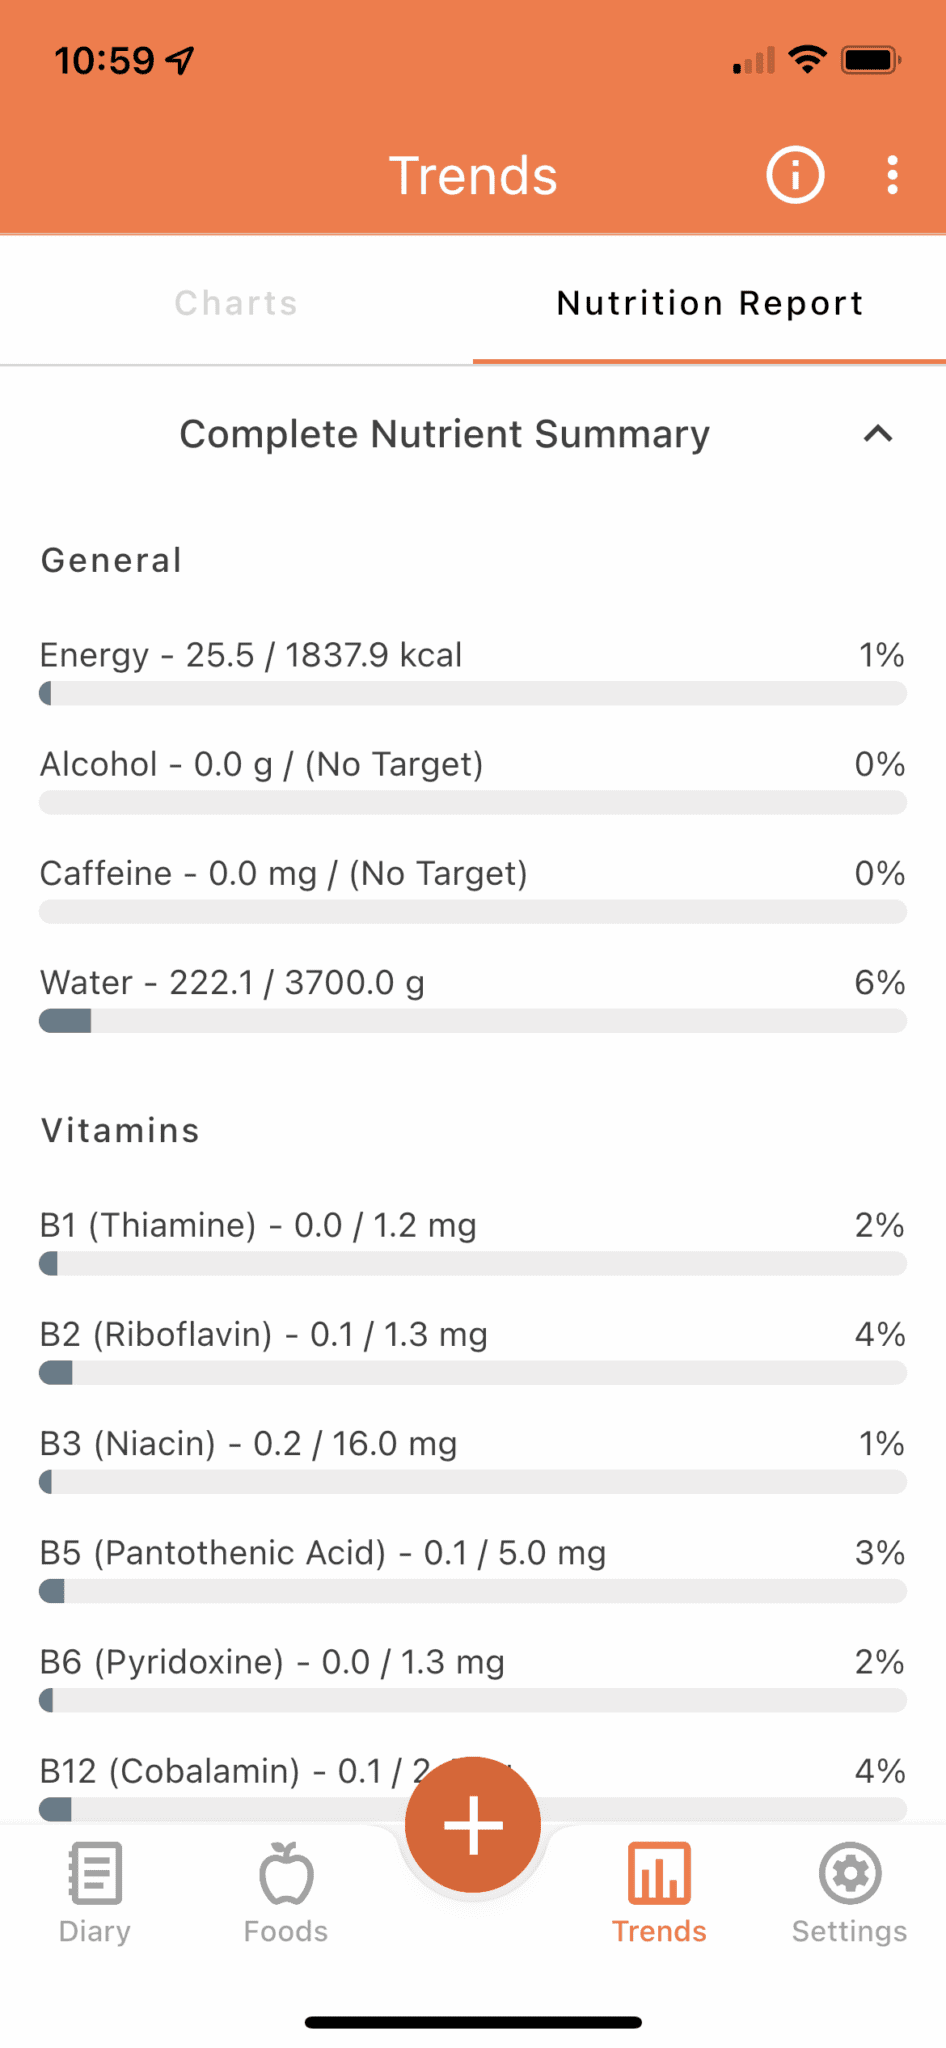 Keep an eye on your intake in the Nutrition Report